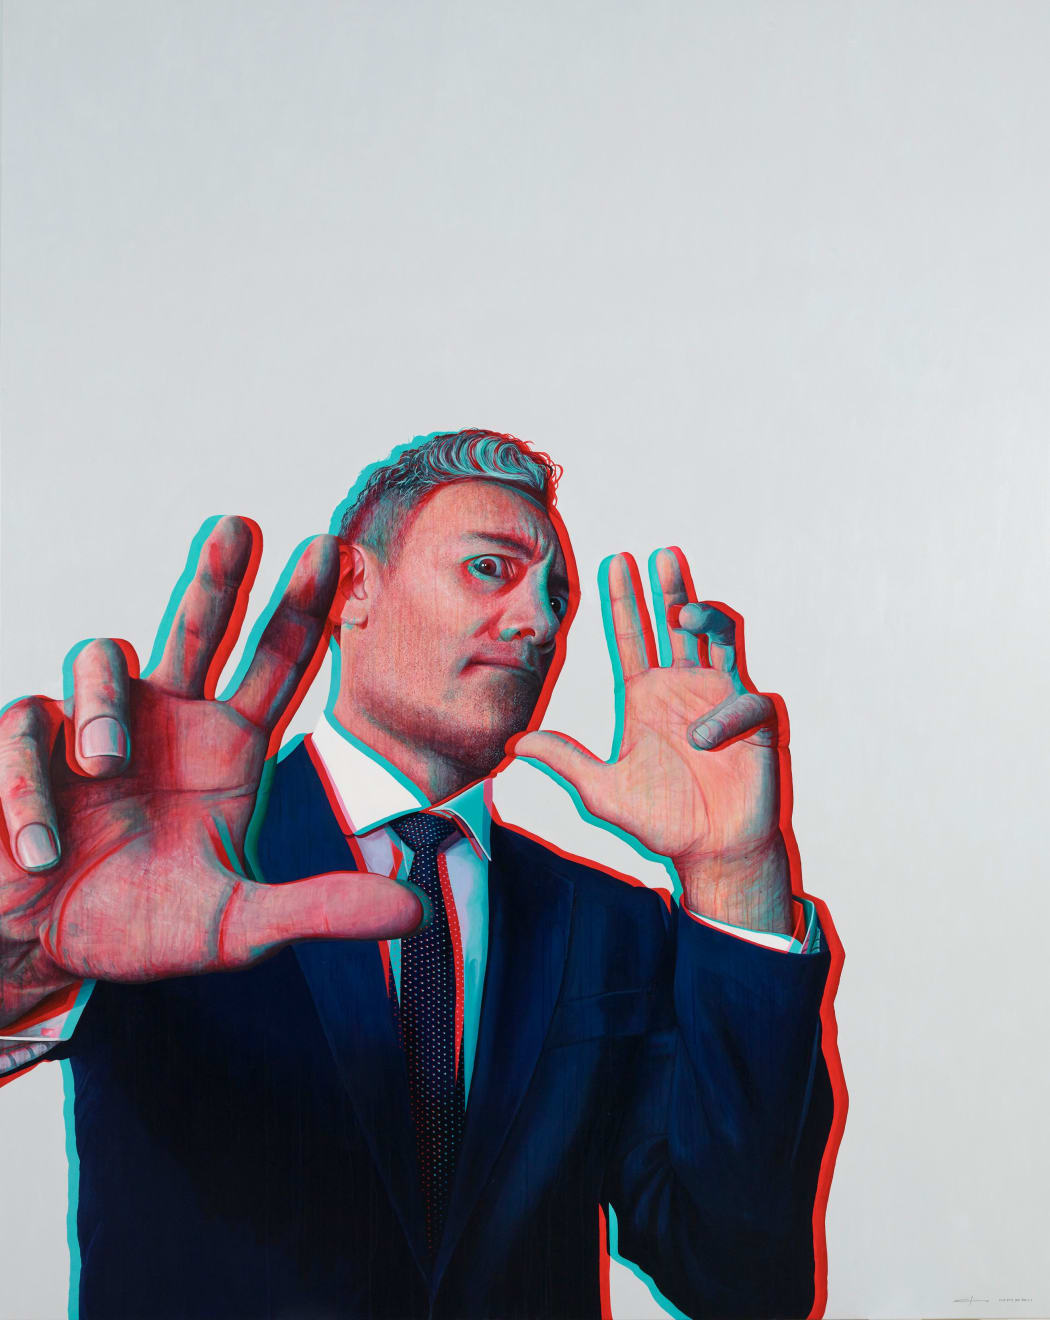 Artist Claus Stangl's painting of filmmaker, actor and comedian Taika Waititi